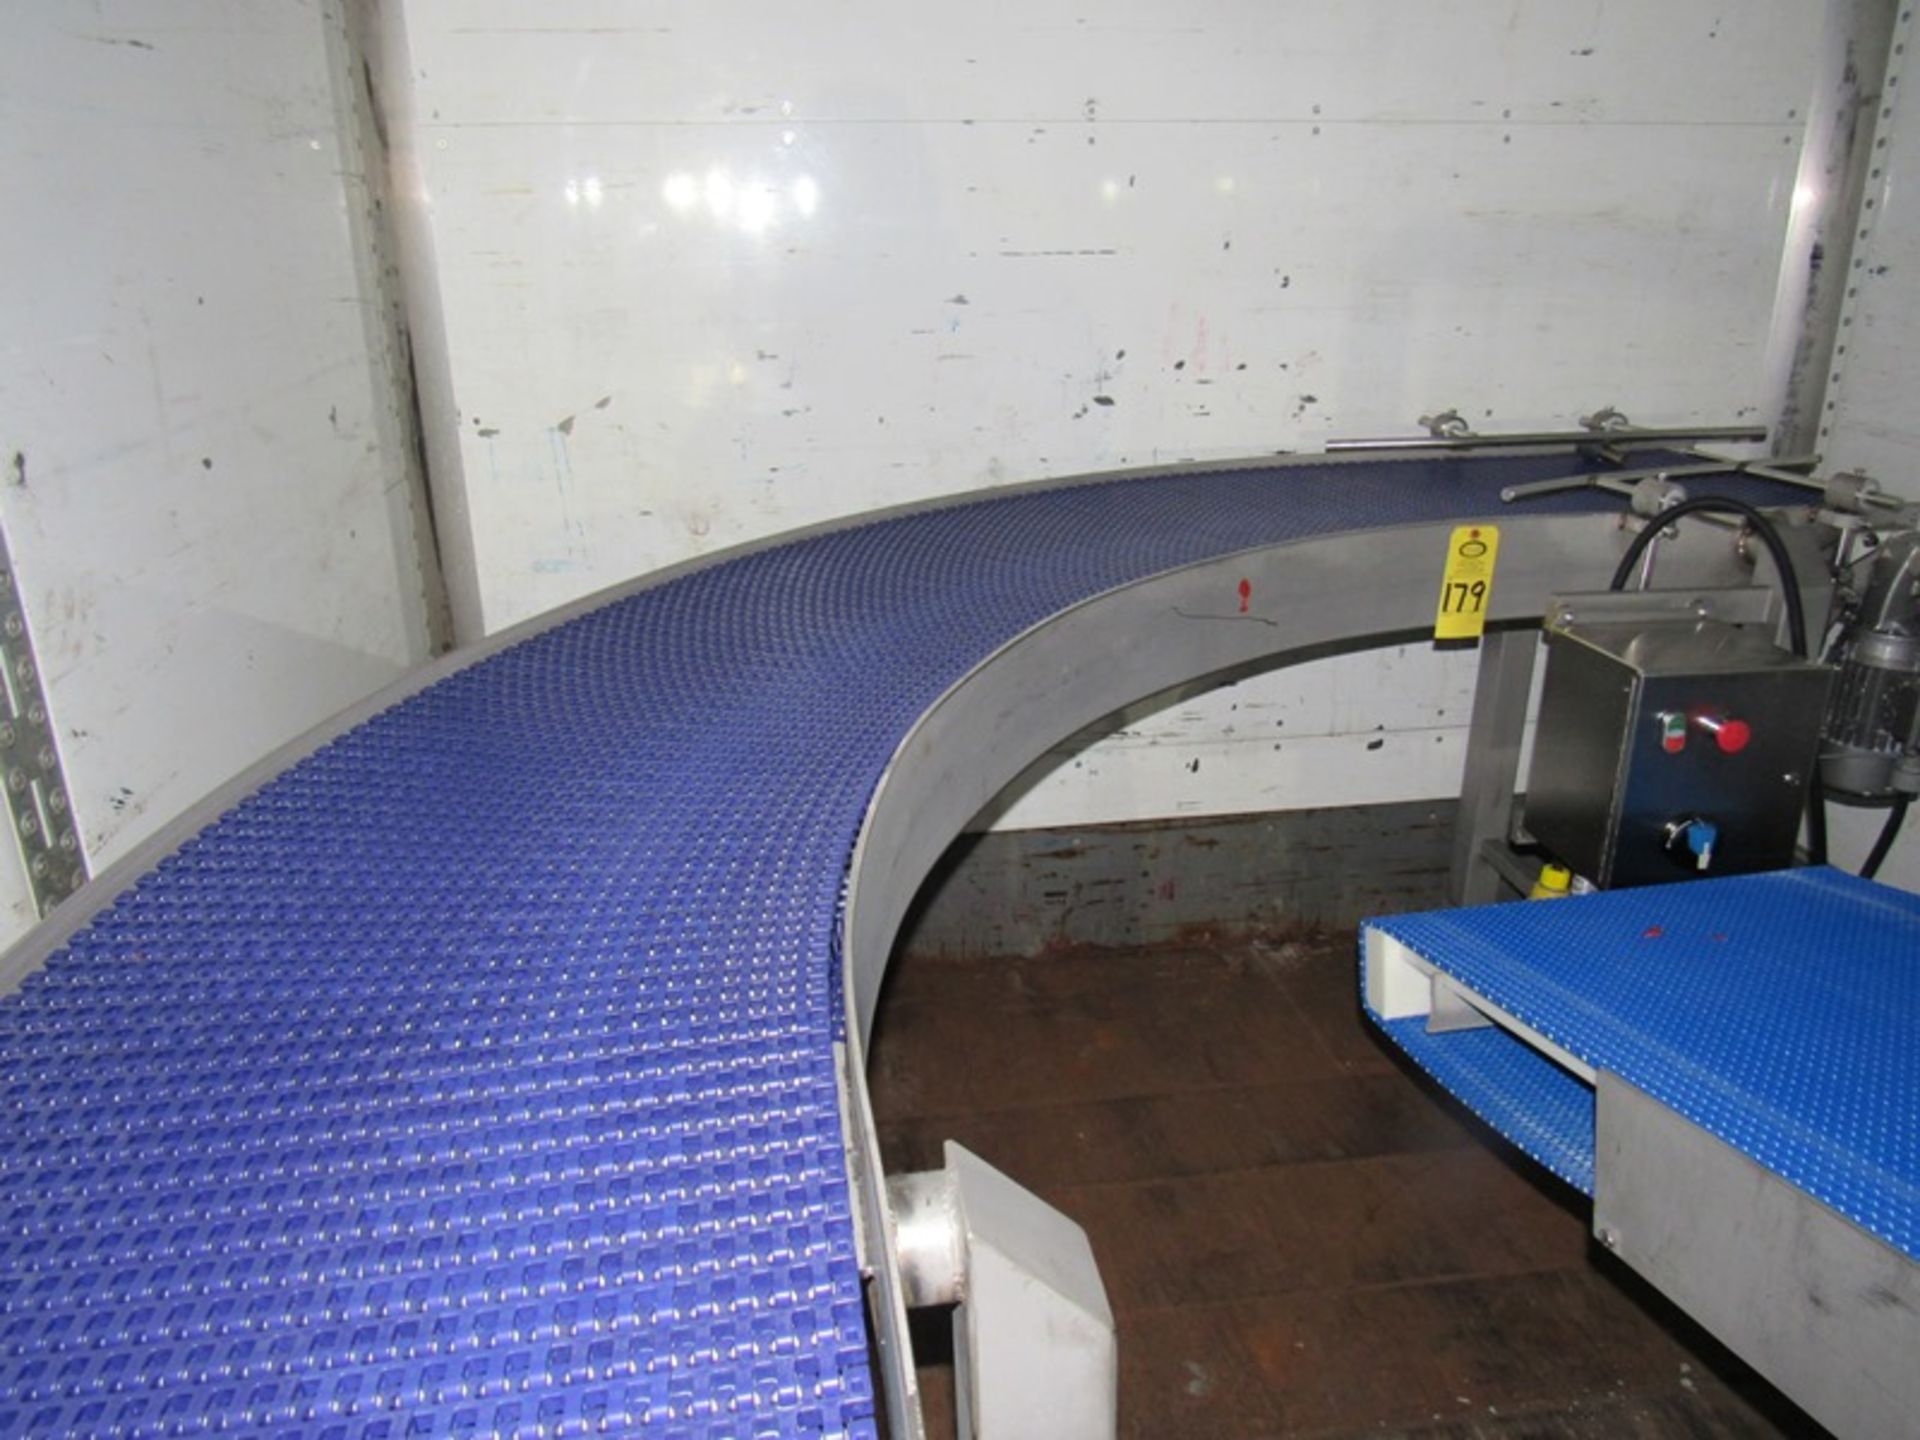 Stainless Steel 90º Conveyor, 19 1/2" W X 20' L blue belt, 12' to turn (Late Pickup Only - March - Image 4 of 5